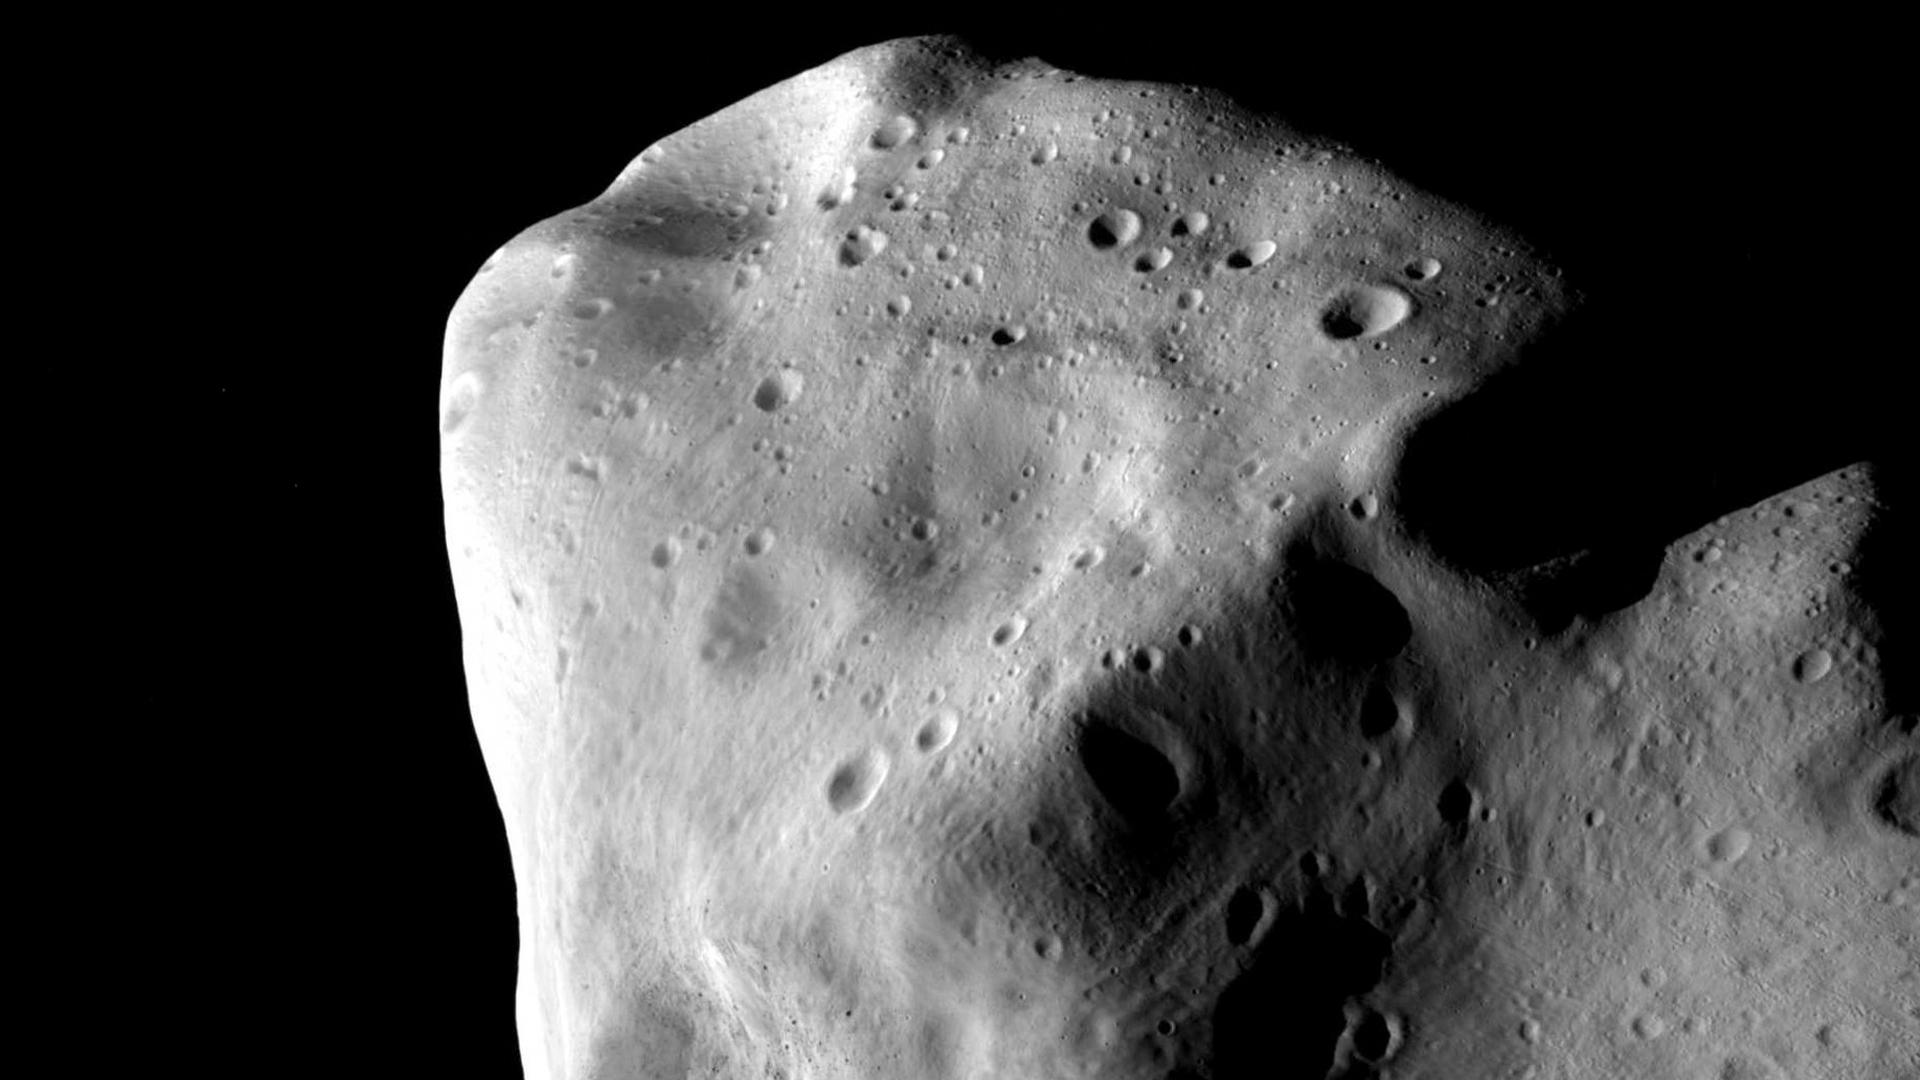 A picture shot by ESA's Rosetta mission's OSIRIS instrument shows asteroid Lutetia at a distance of 3162 km (1964 miles) its closest approach, July 10, 2010. The images show that Lutetia is heavily cratered, having suffered many impacts during its 4.5 bil